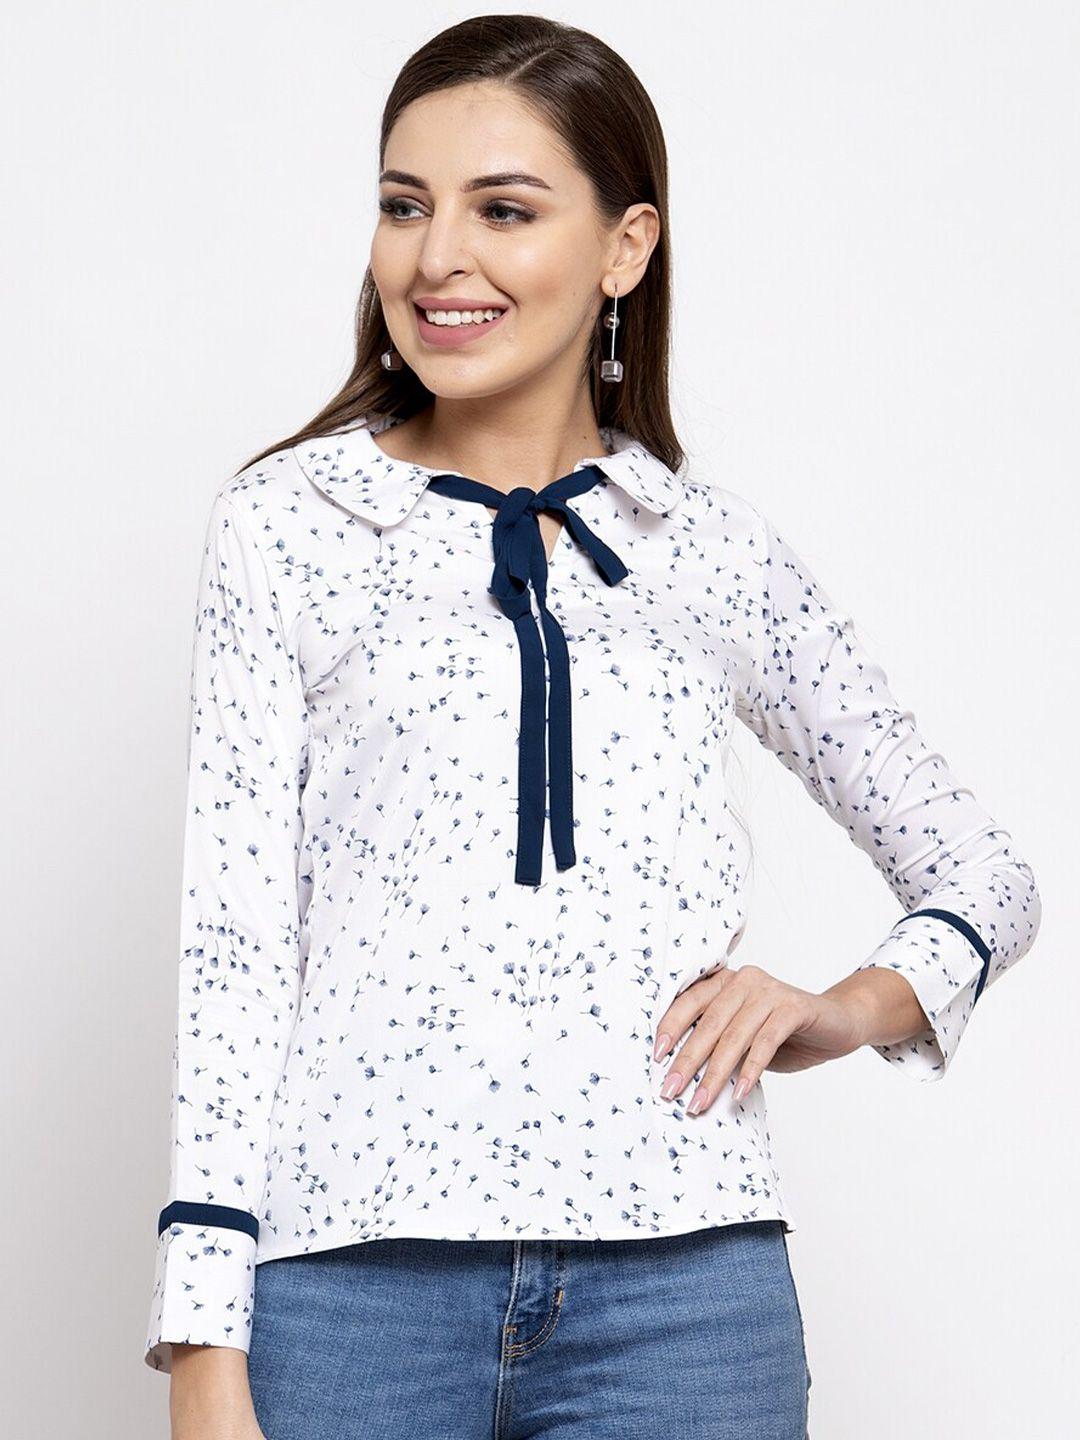 claura off white & navy blue floral print tie-up neck georgette shirt style top